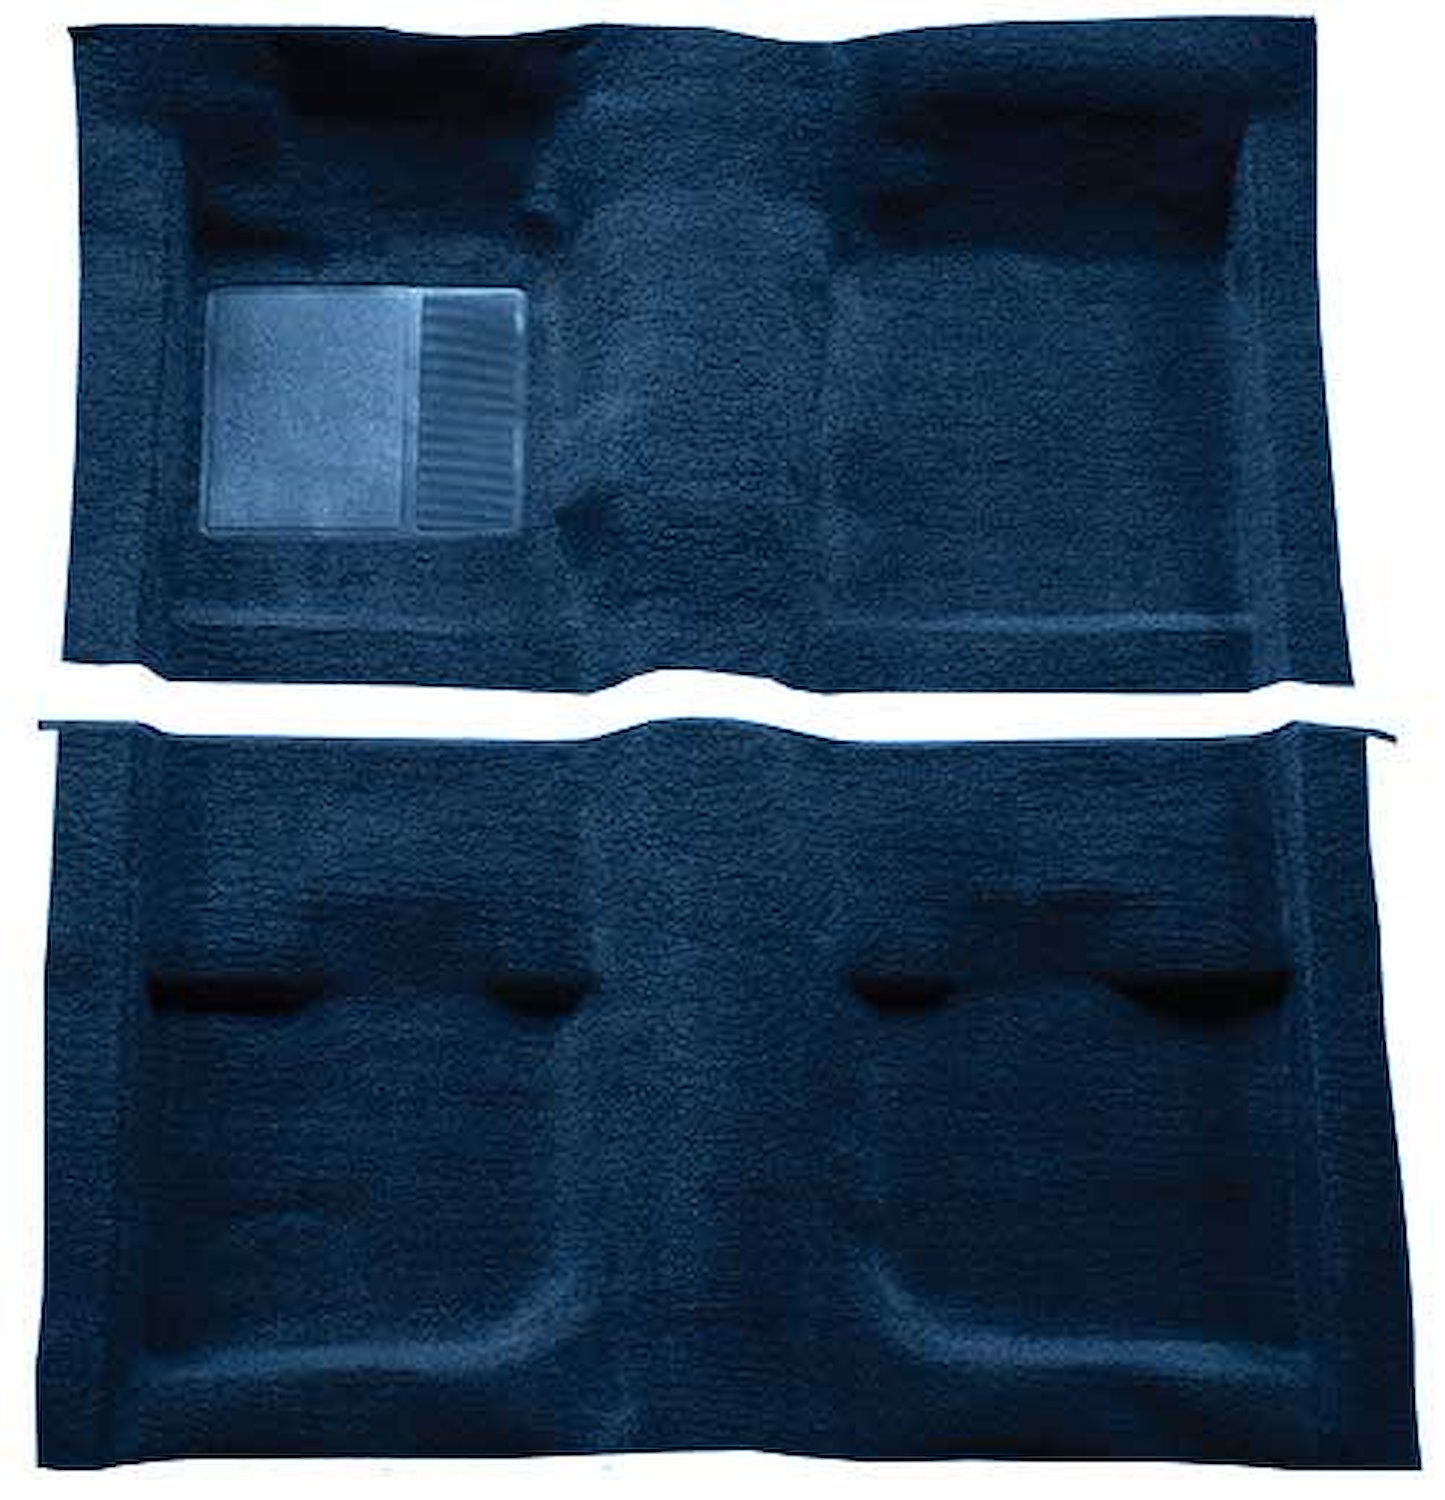 A4057B12 Passenger Area Nylon Loop Carpet 1971-73 Mustang Coupe/Fastback With Mass Backing; Dark Blue